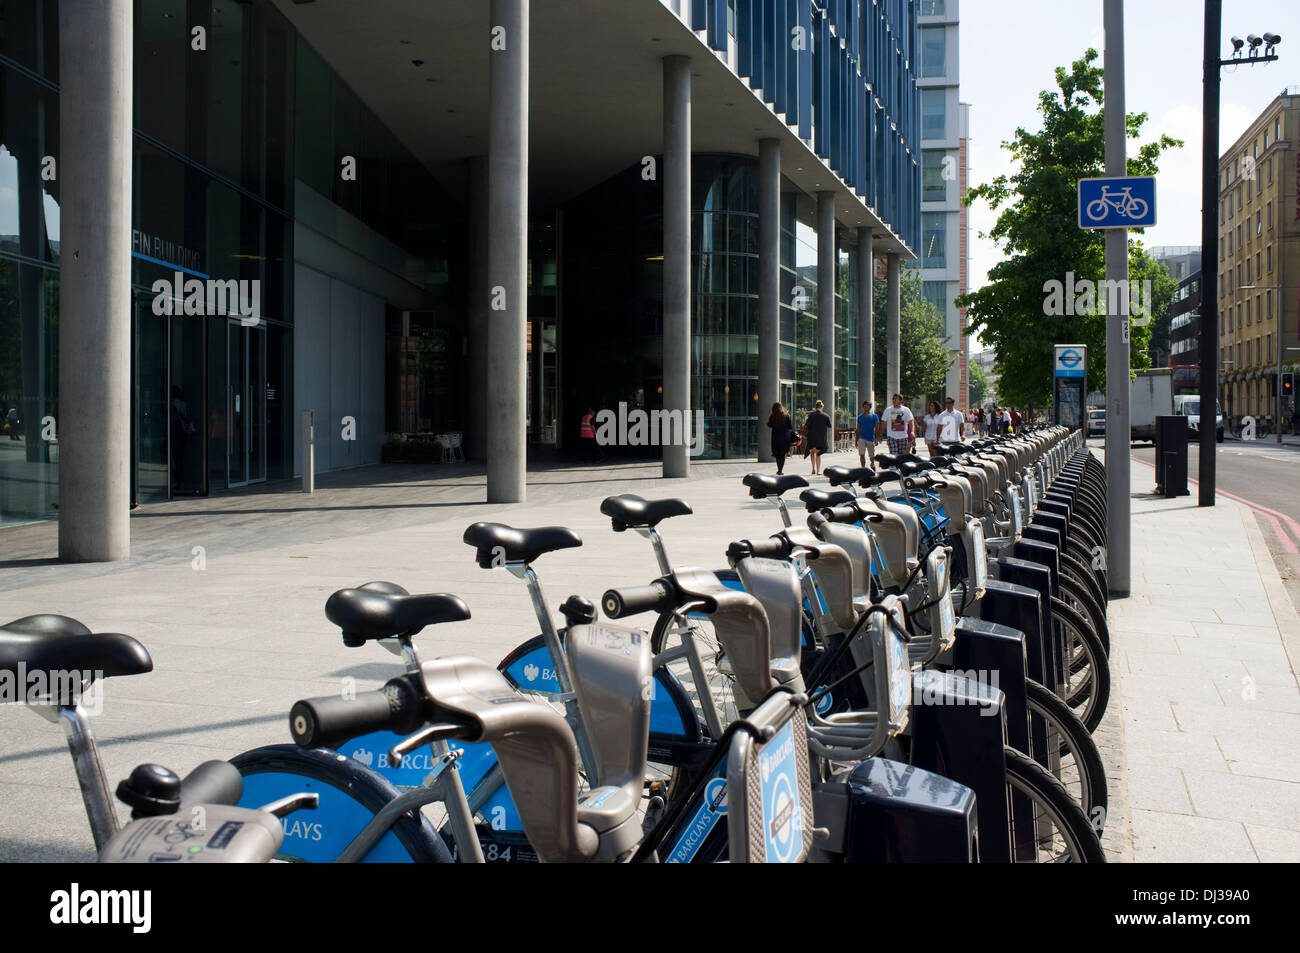 A row of Boris bikes, Barclay's Cycle Hire public bicycle sharing scheme  outside the Blue Fin Building, Bankside, London, UK. Stock Photo